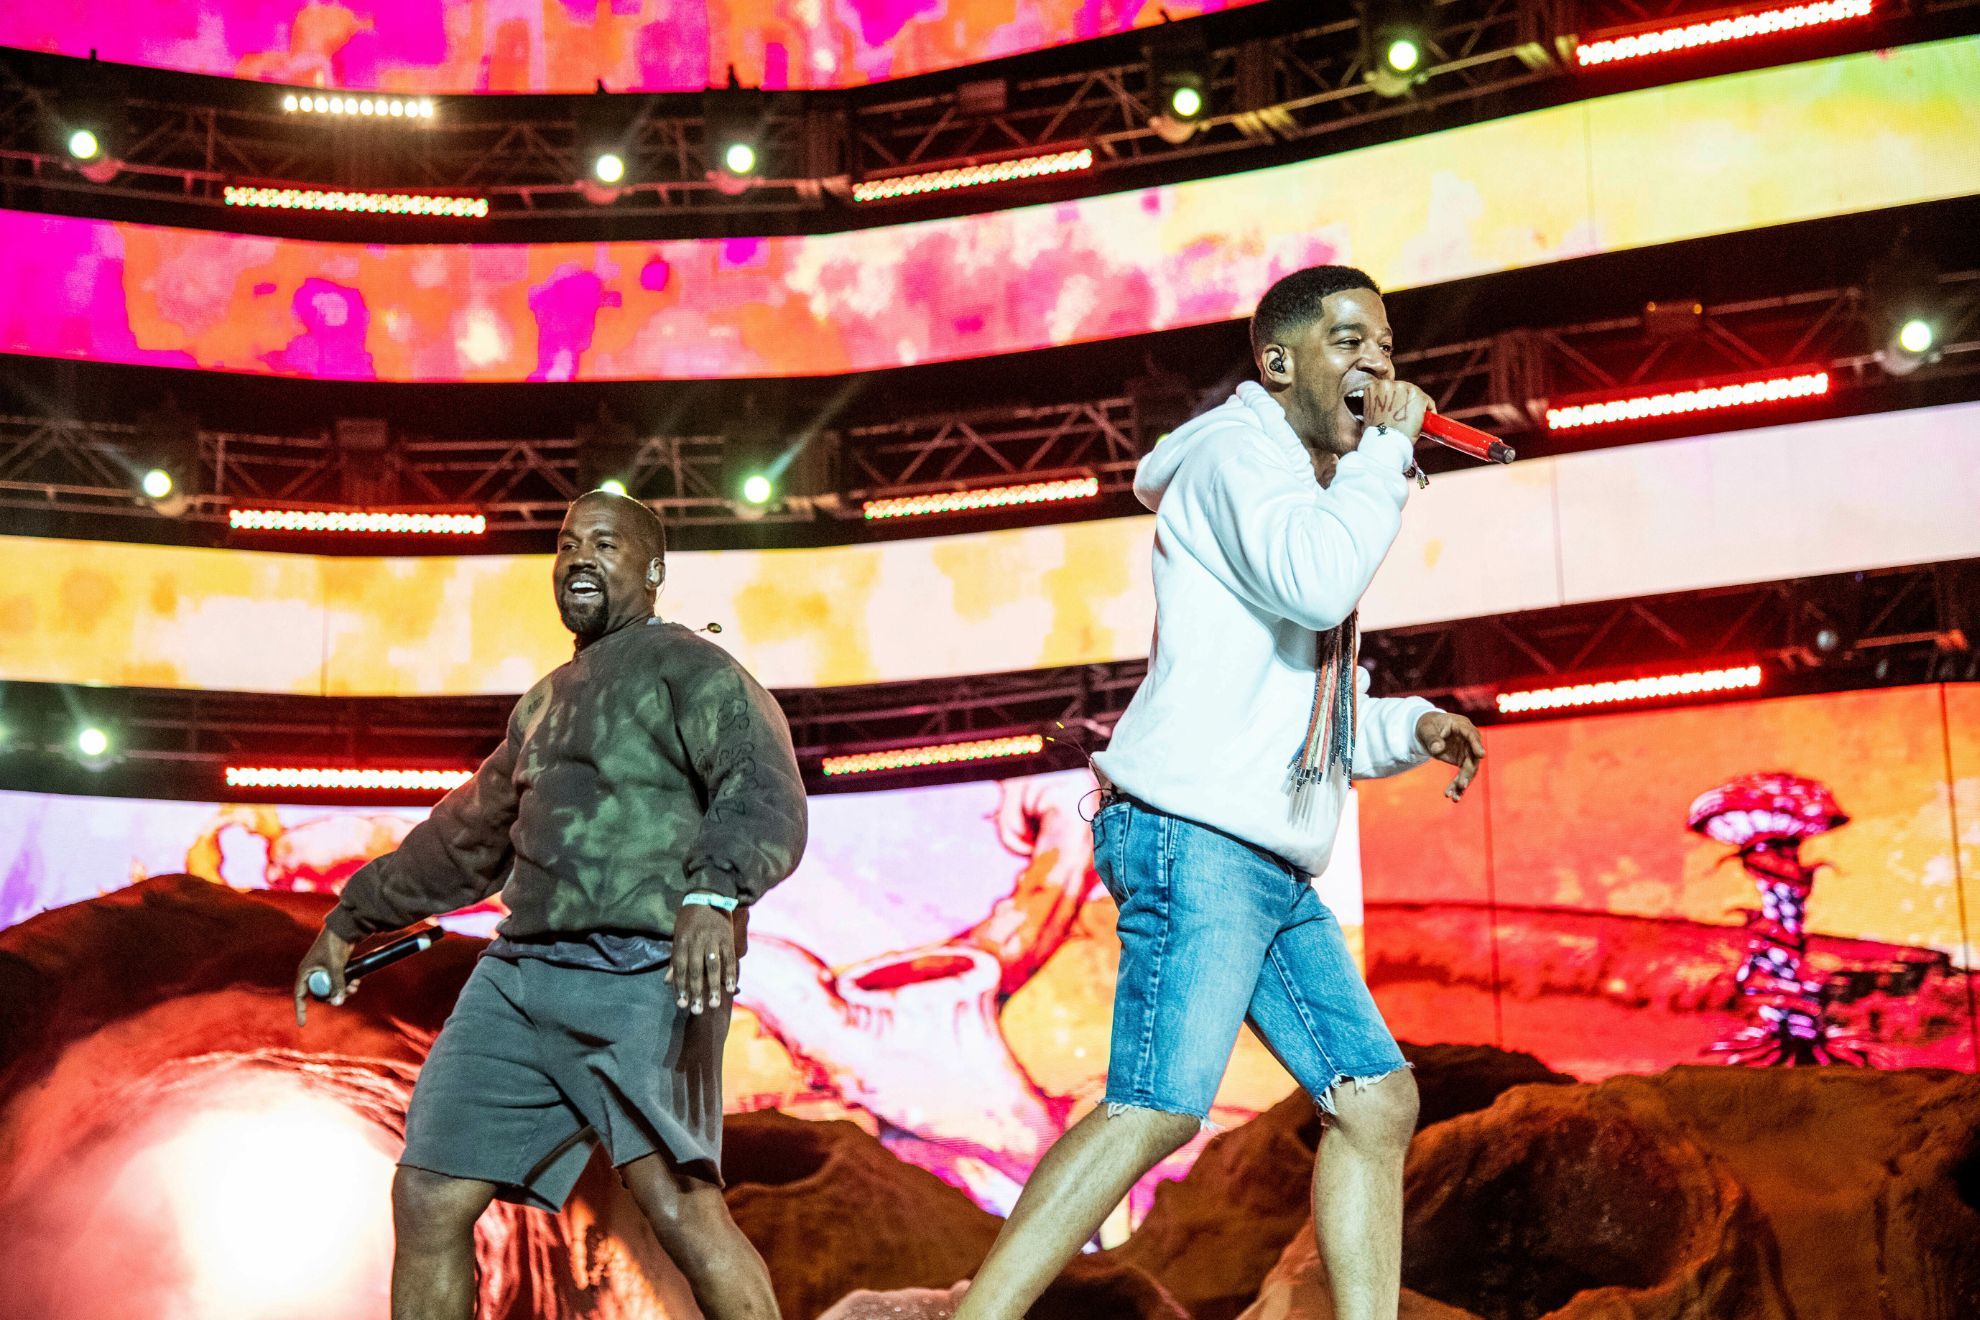 Kid Cudi explains why he decided to forgive Kanye West: Hes learning and growing.